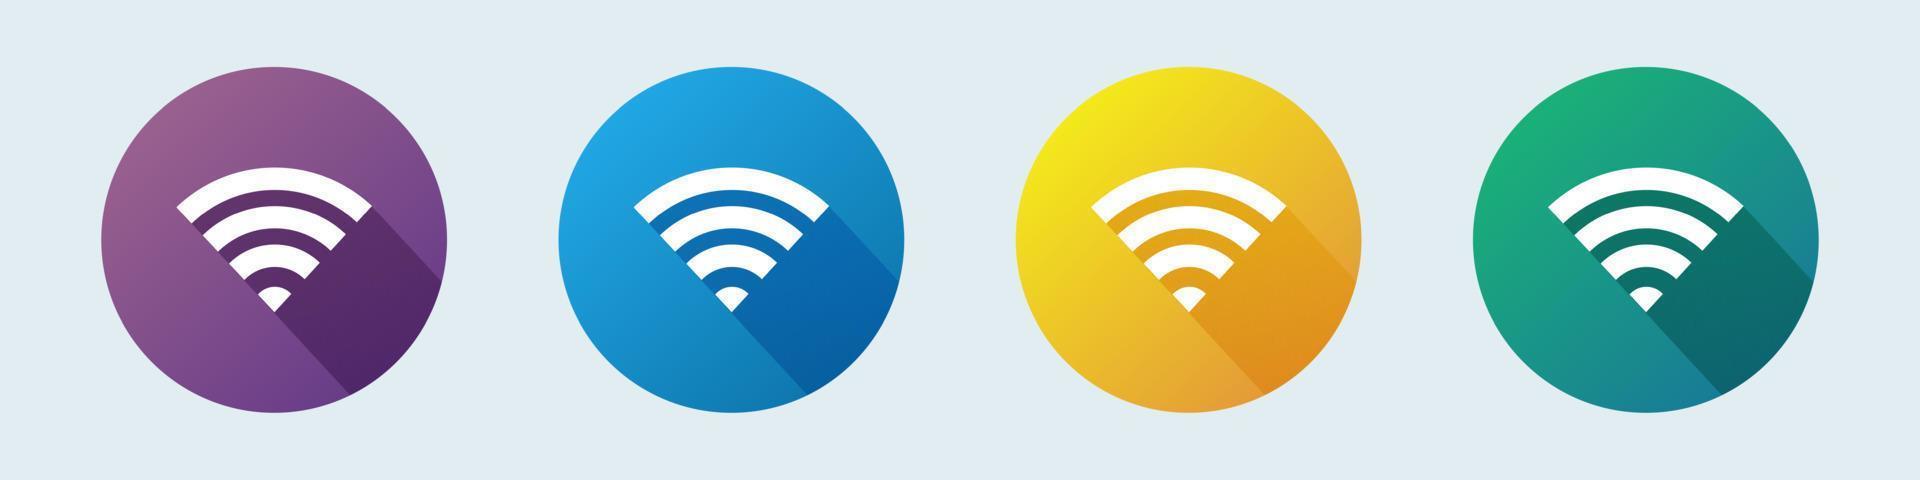 Wifi internet sign icon in flat style. Wireless internet signal icon for apps. vector